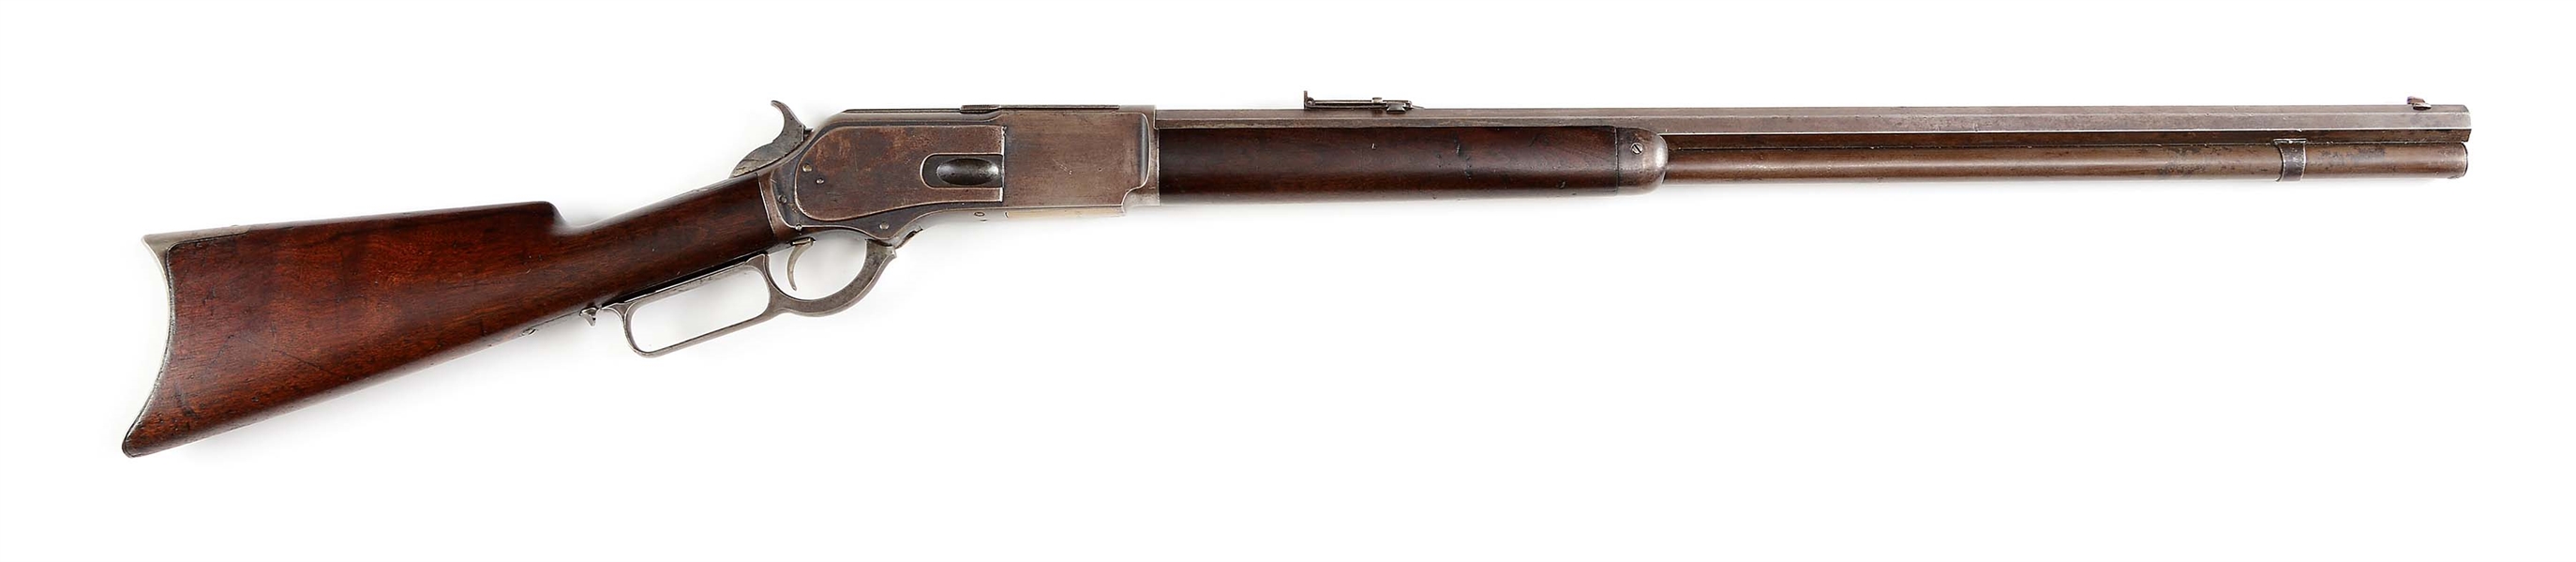 (A) WINCHESTER ANTIQUE MODEL 1876 LEVER ACTION RIFLE (1884).